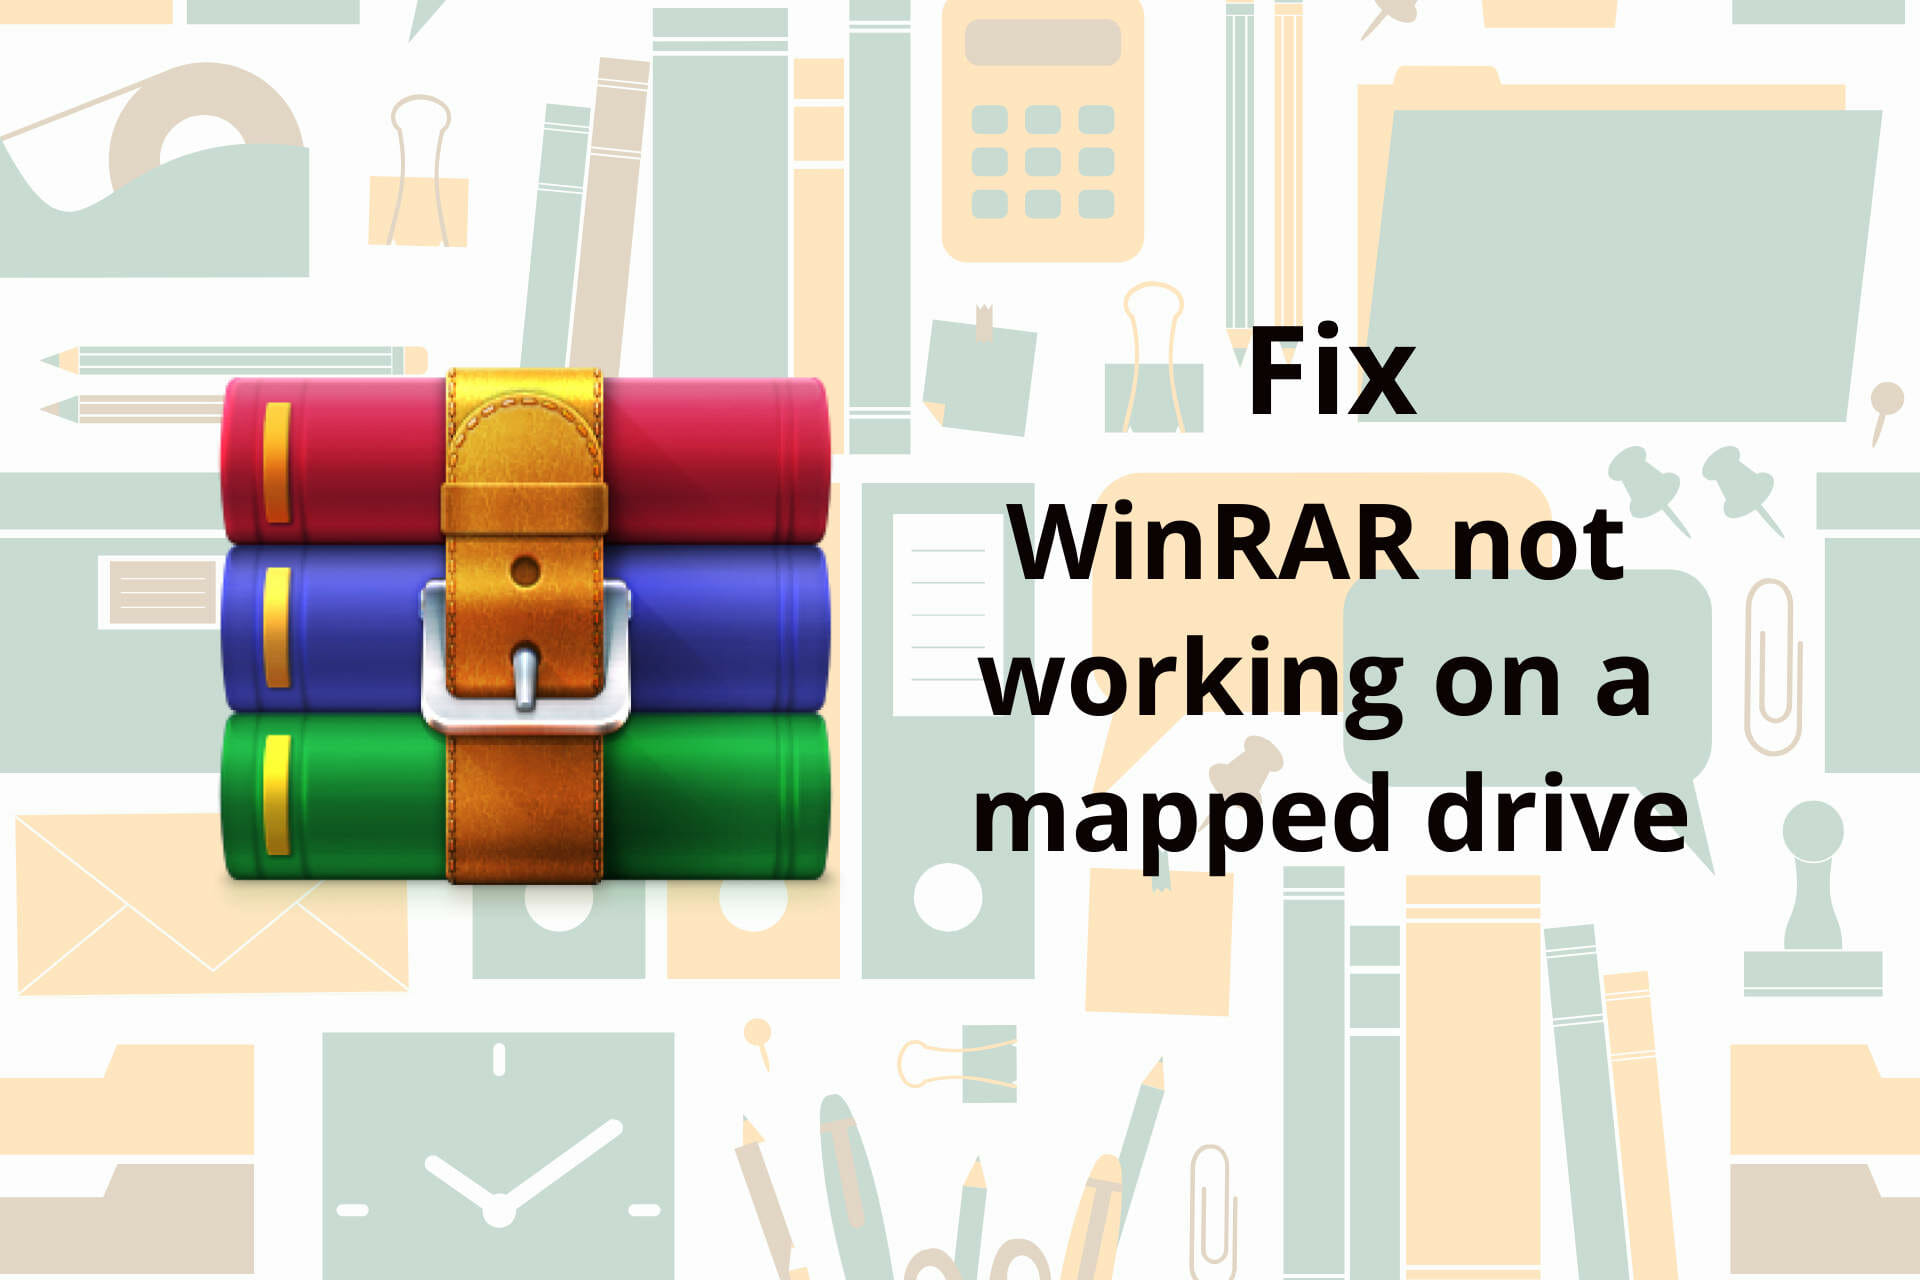 How to fix WinRAR not working on a mapped drive